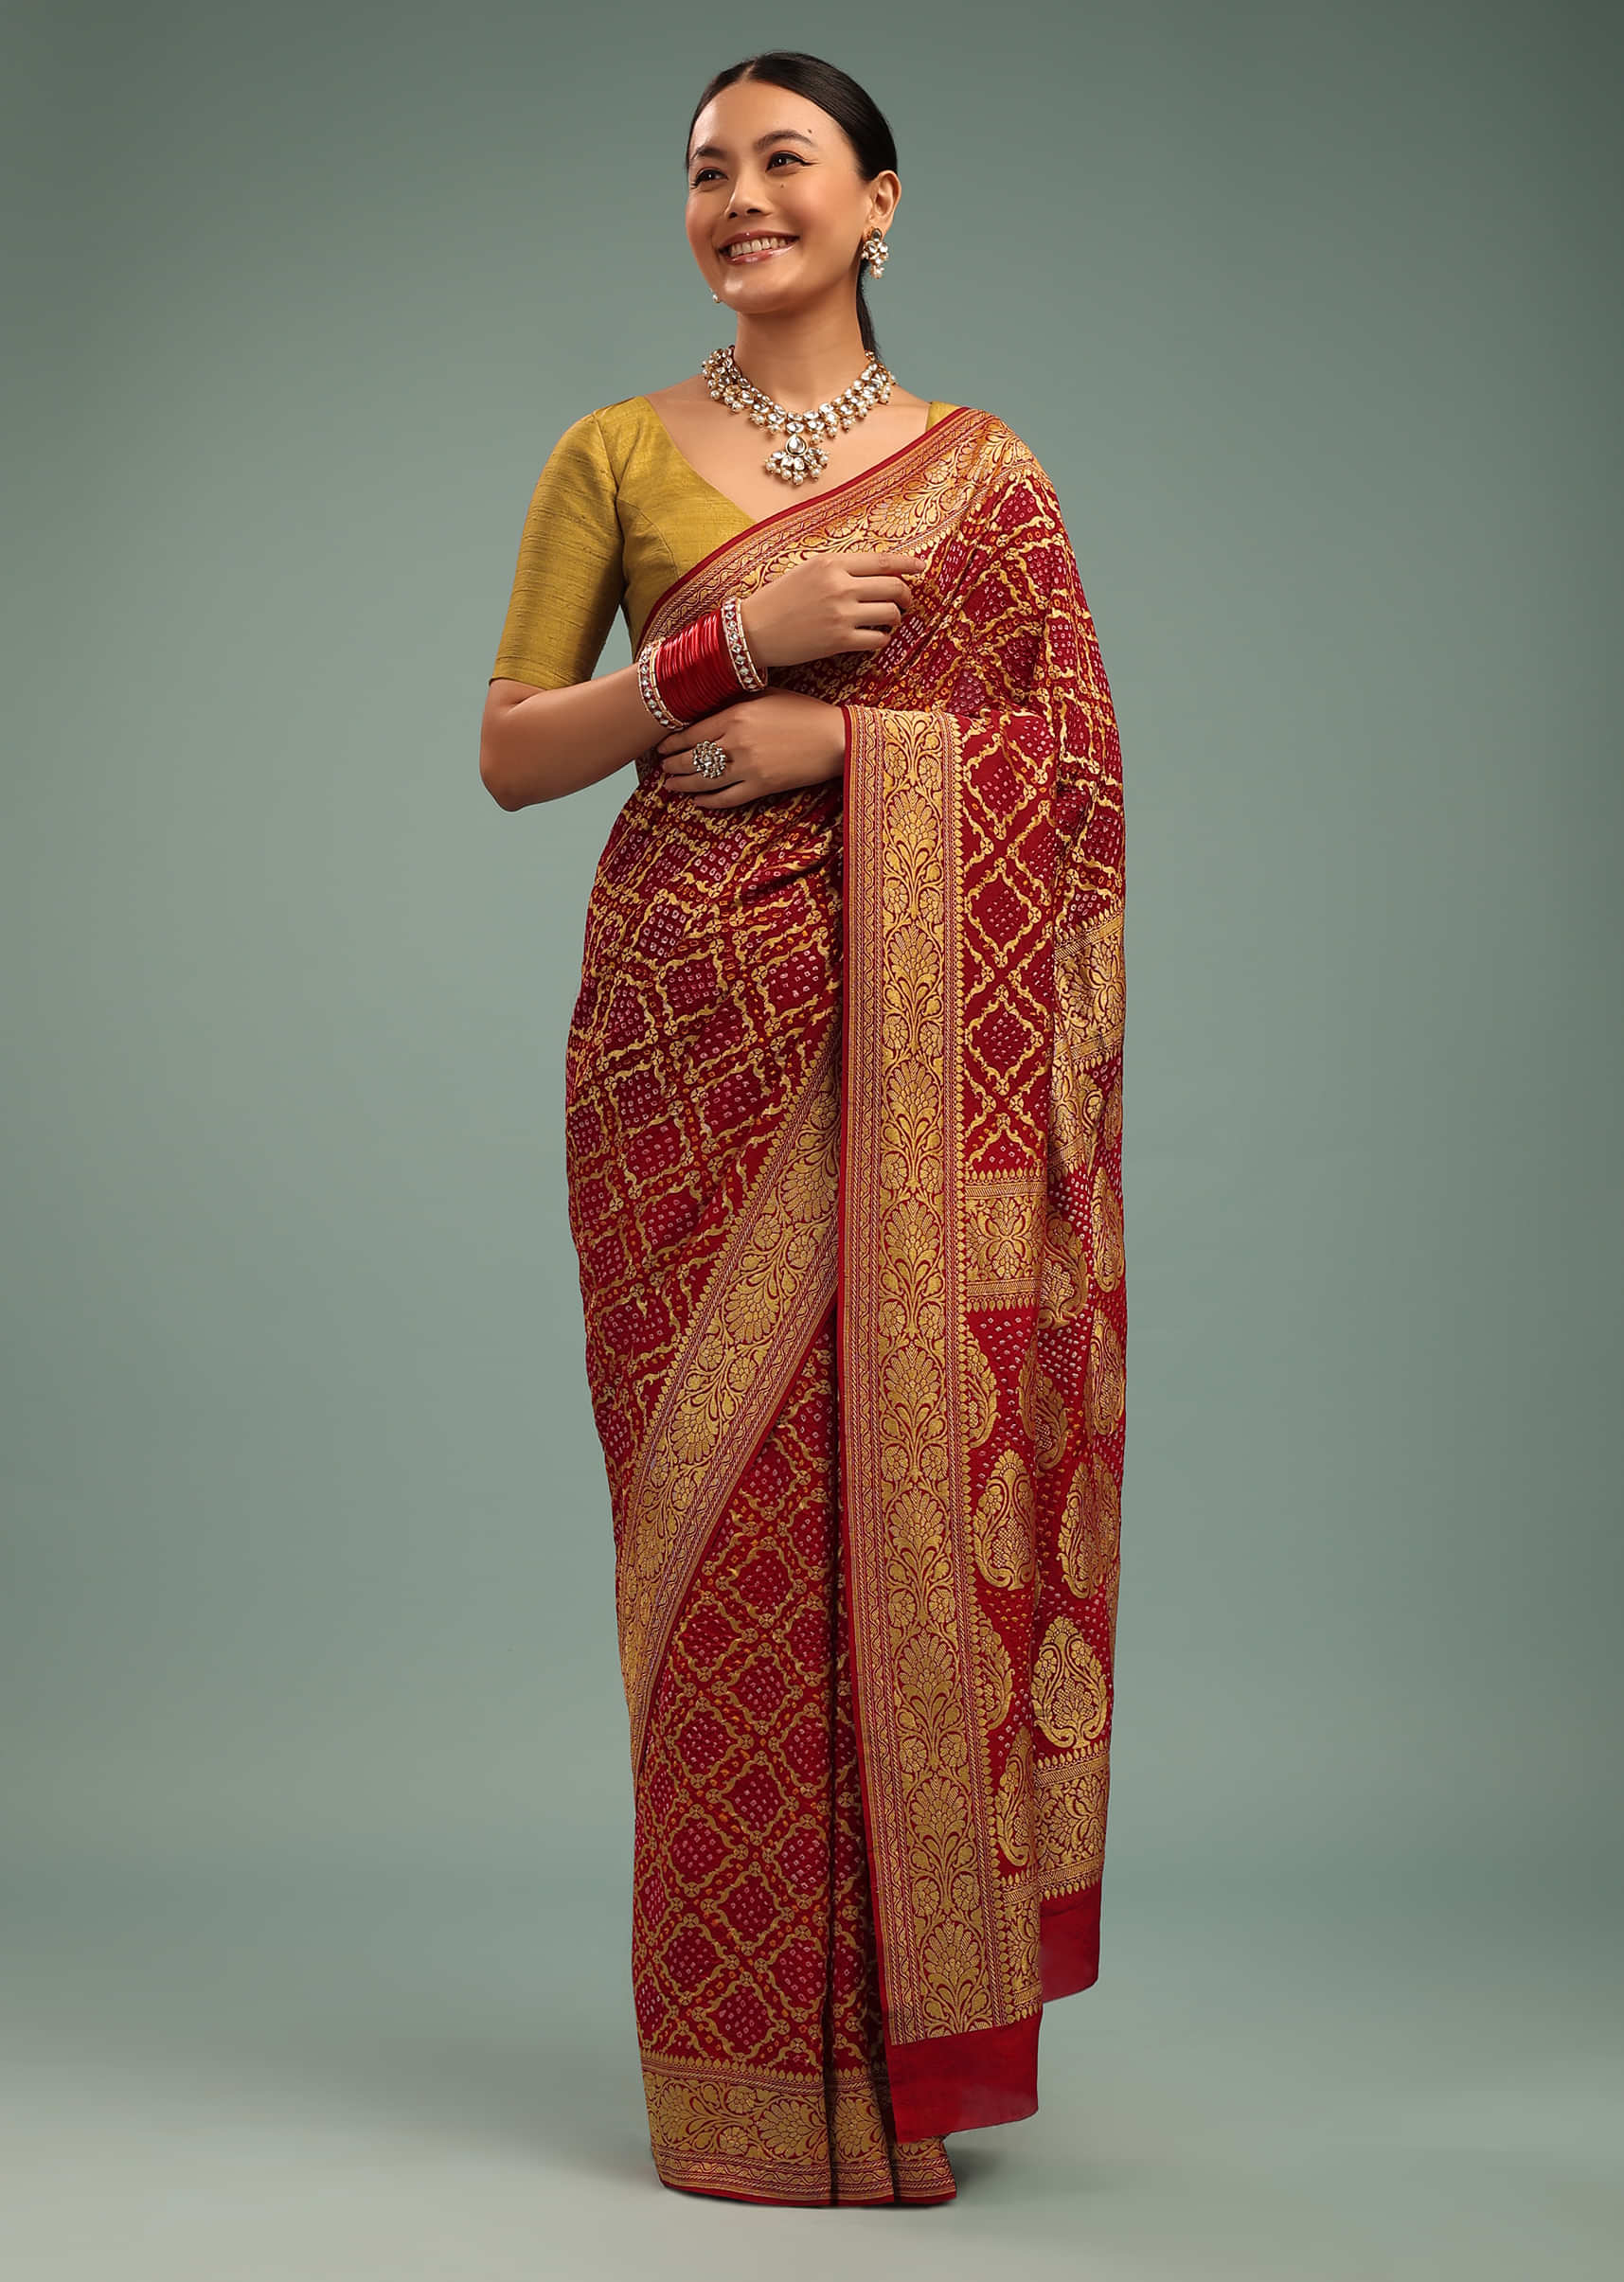 Kalki Authentic Chili Pepper Red Saree In Georgette With Bandhani Handwoven Floral Brocade Work